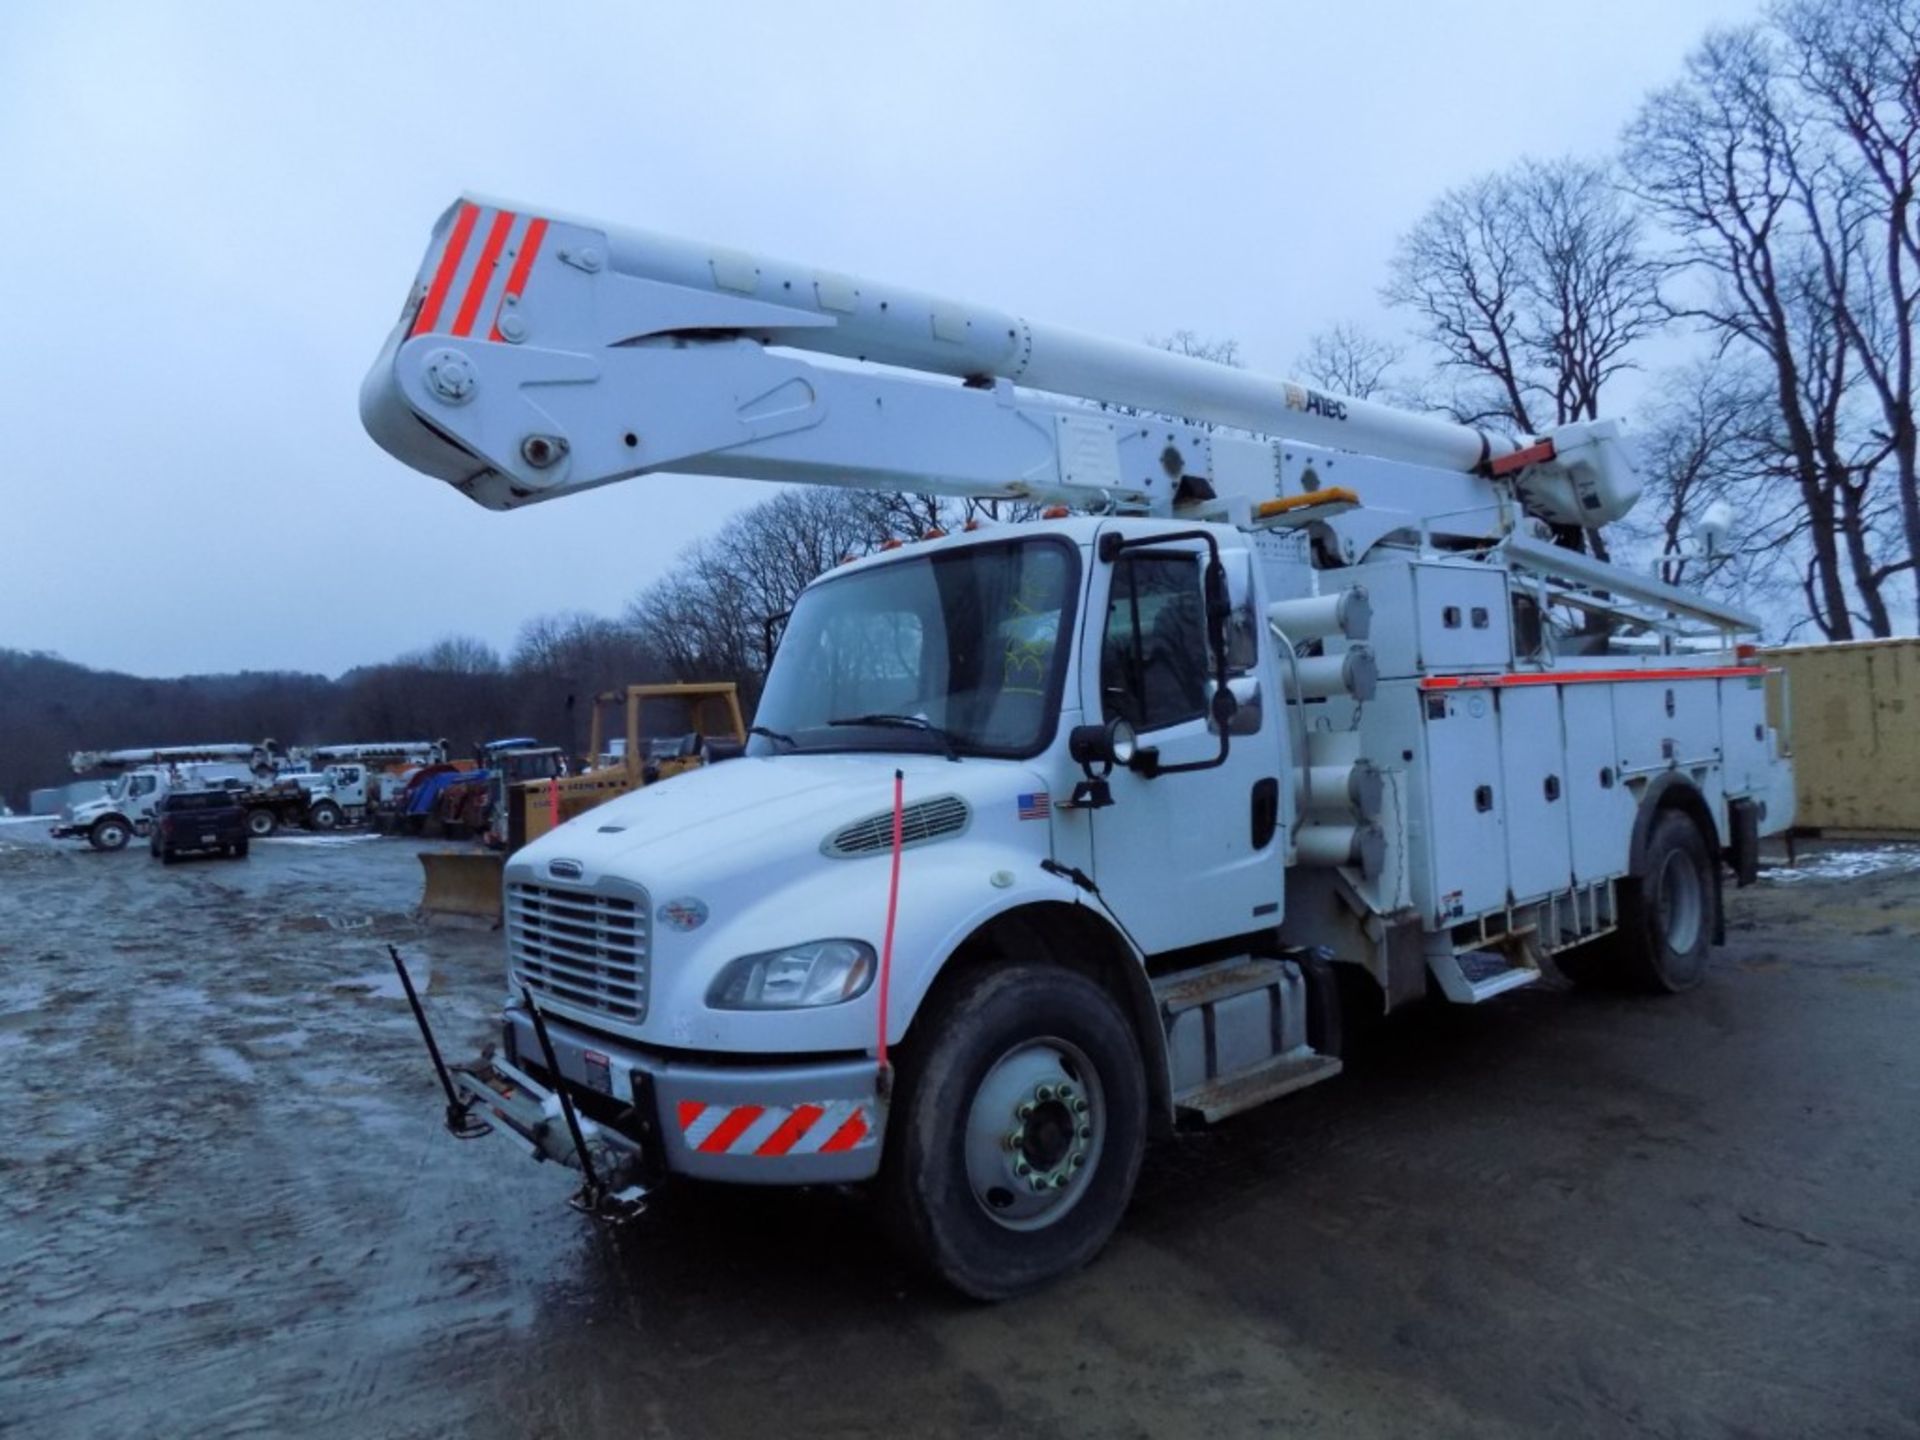 2012 Freightliner Business Class M2 Bucket Truck, Altec 55' Boom on Body with Down Riggers, 2 WD,